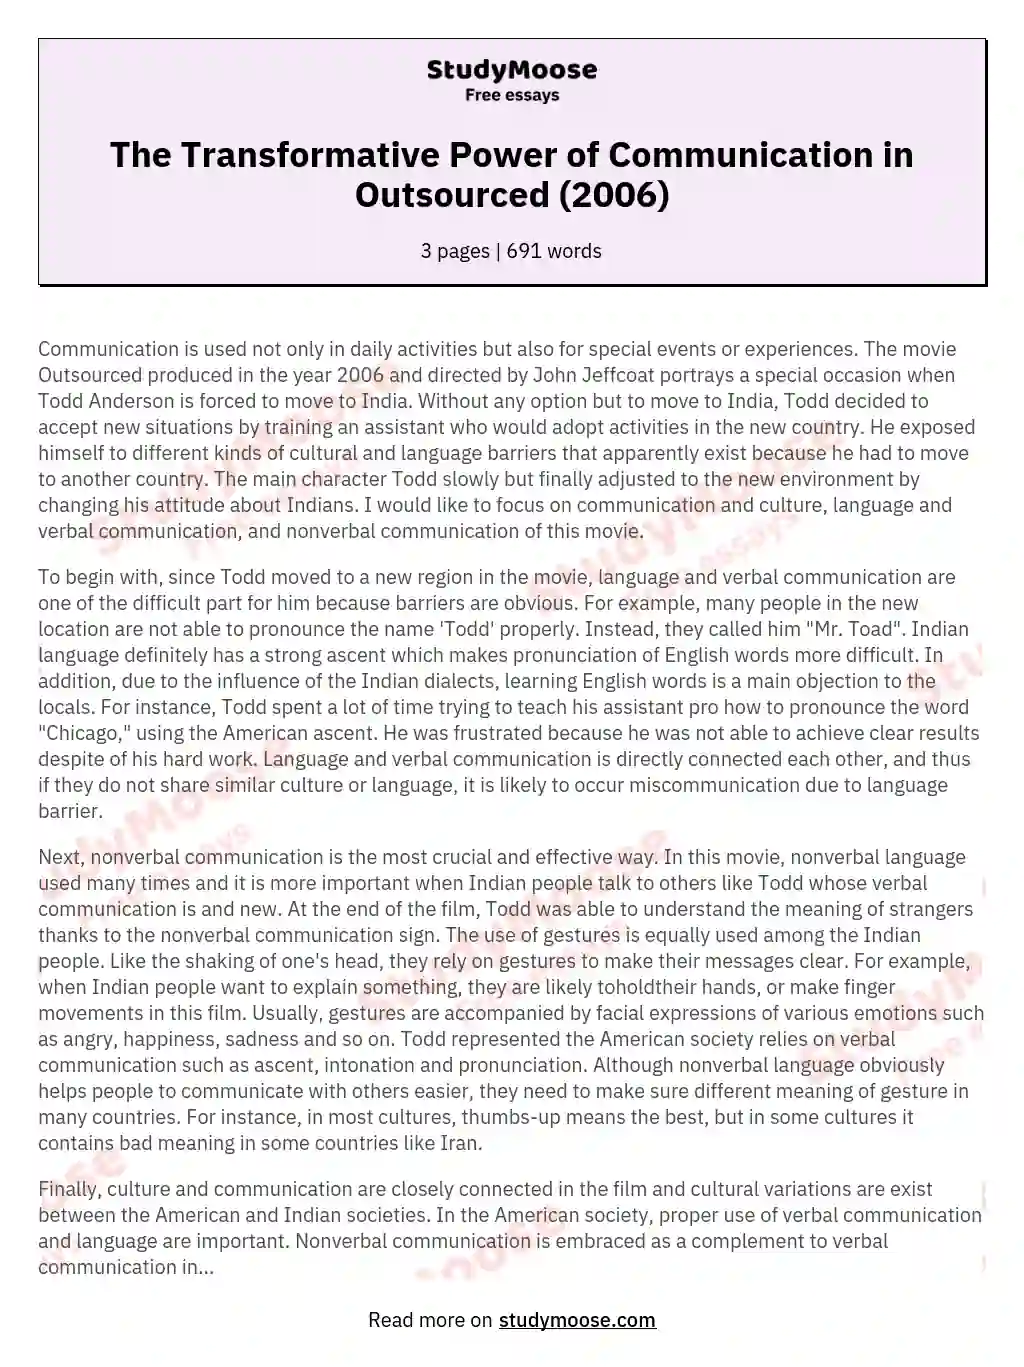 The Transformative Power of Communication in Outsourced (2006) essay